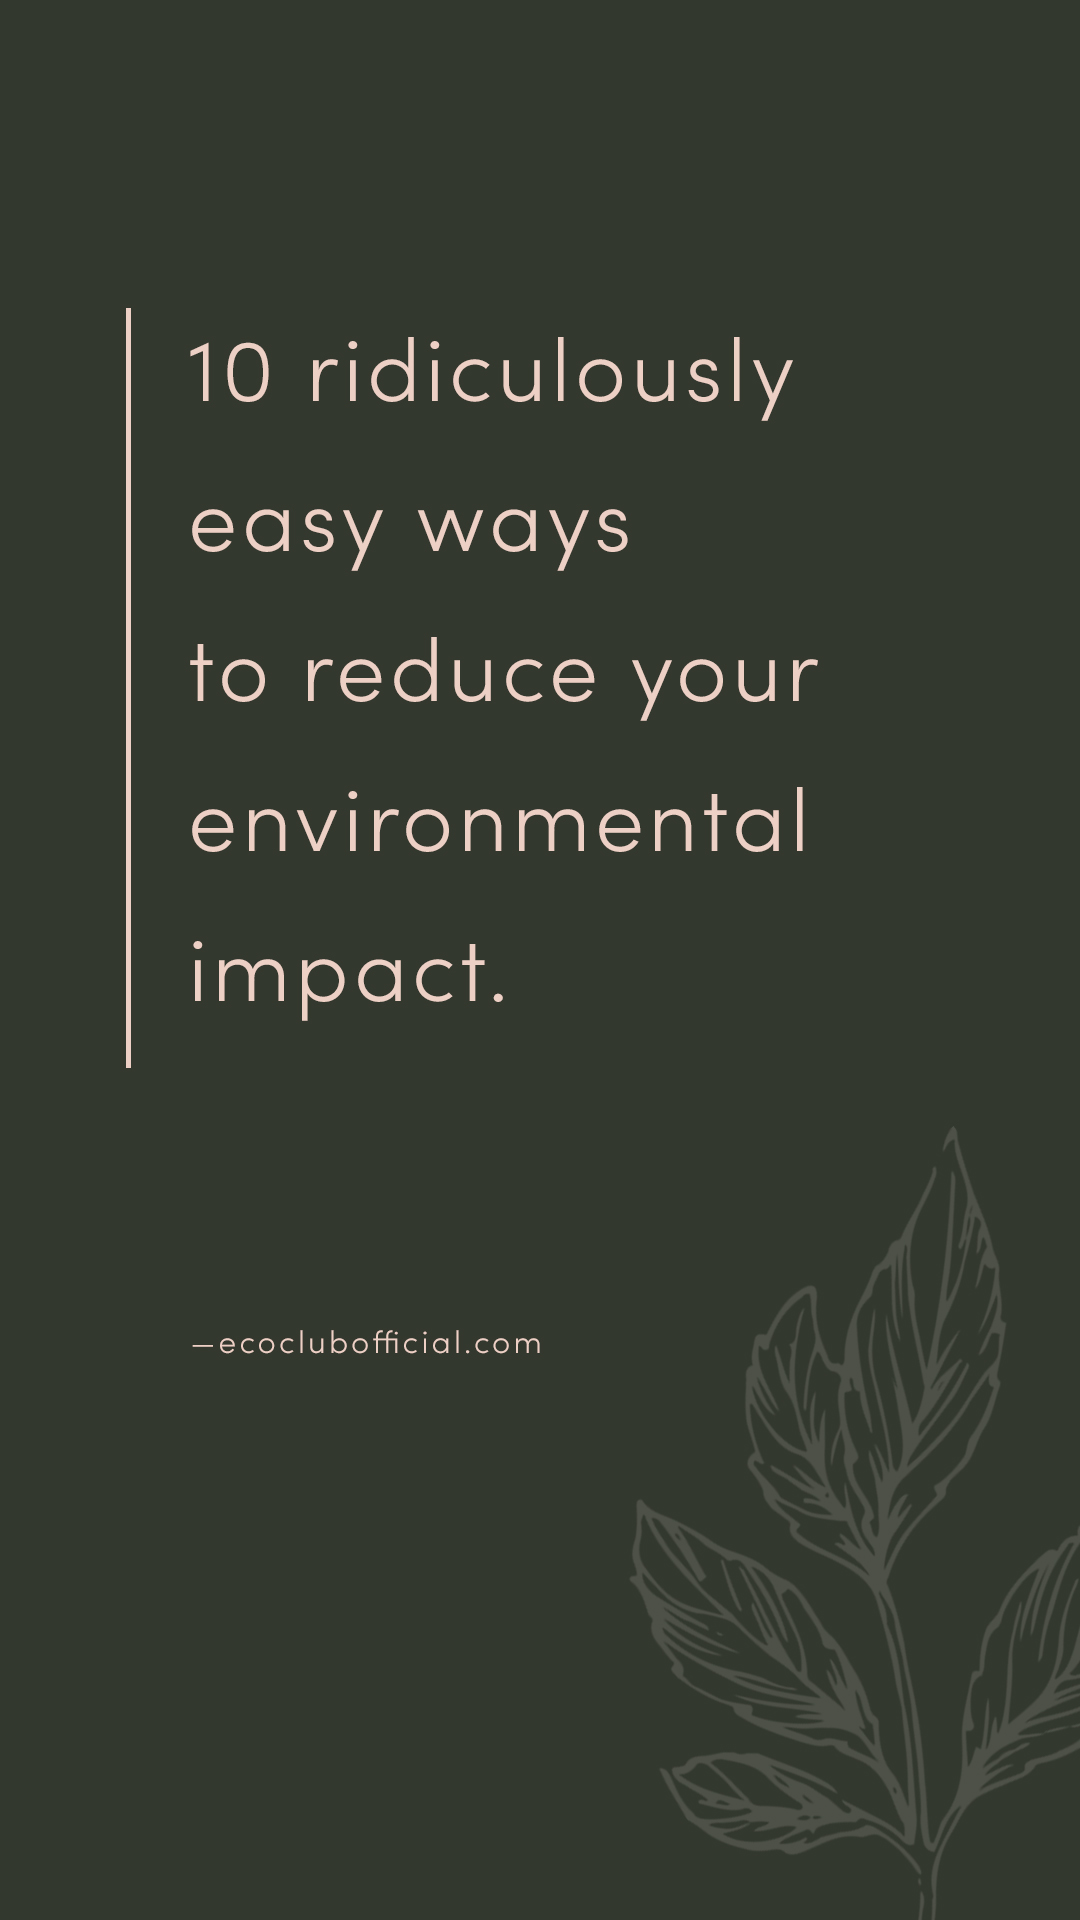 10 ridiculously easy ways to reduce your impact via eco club